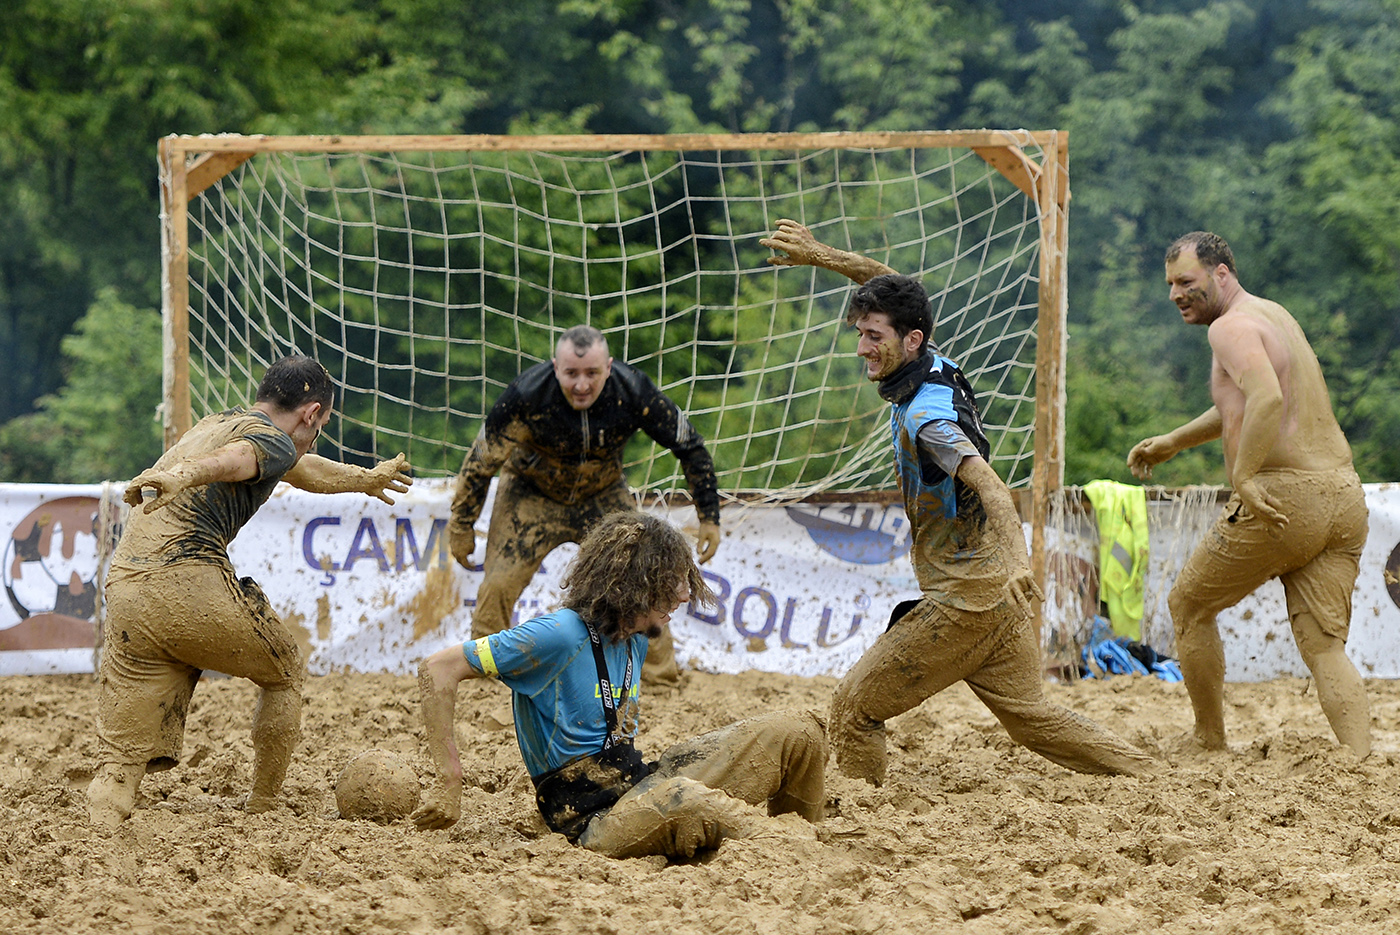 Participants in action during the Swamp Soccer event in Istanbul, Turkey 10 May 2014.